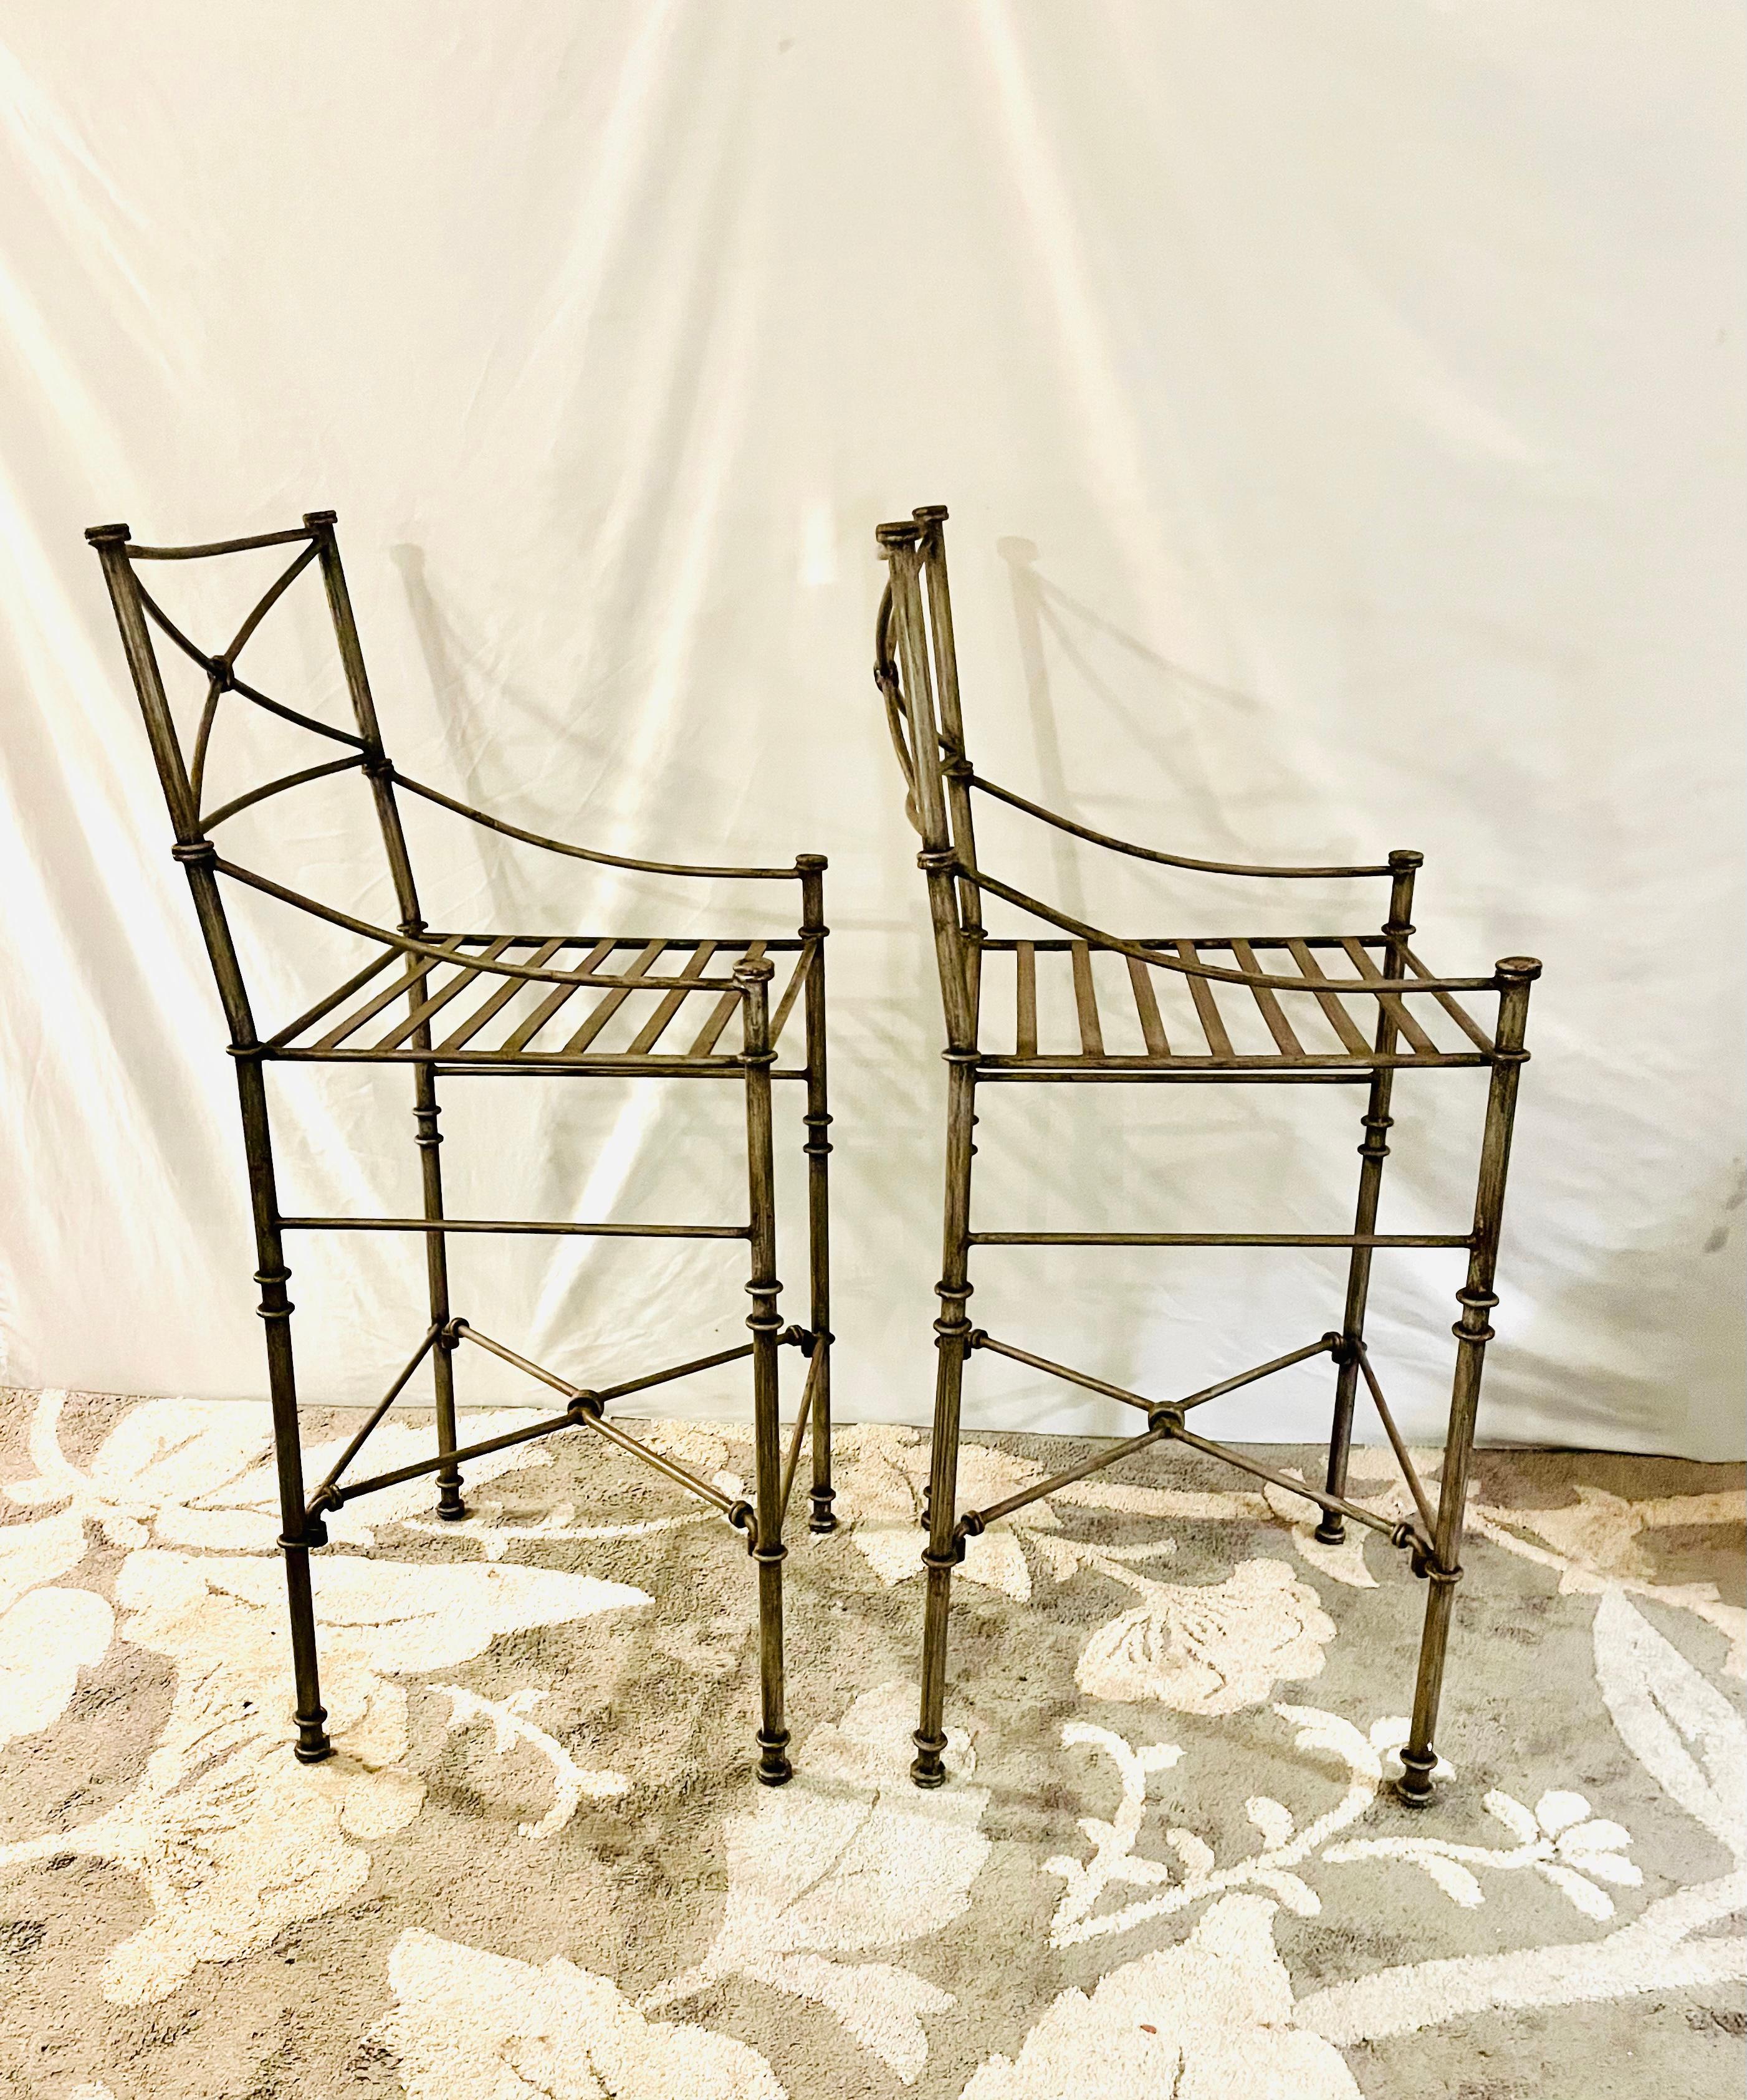 20th Century Giacometti Inspired Wrought Iron Chairs A Set of Bar Stool Dining Chairs For Sale